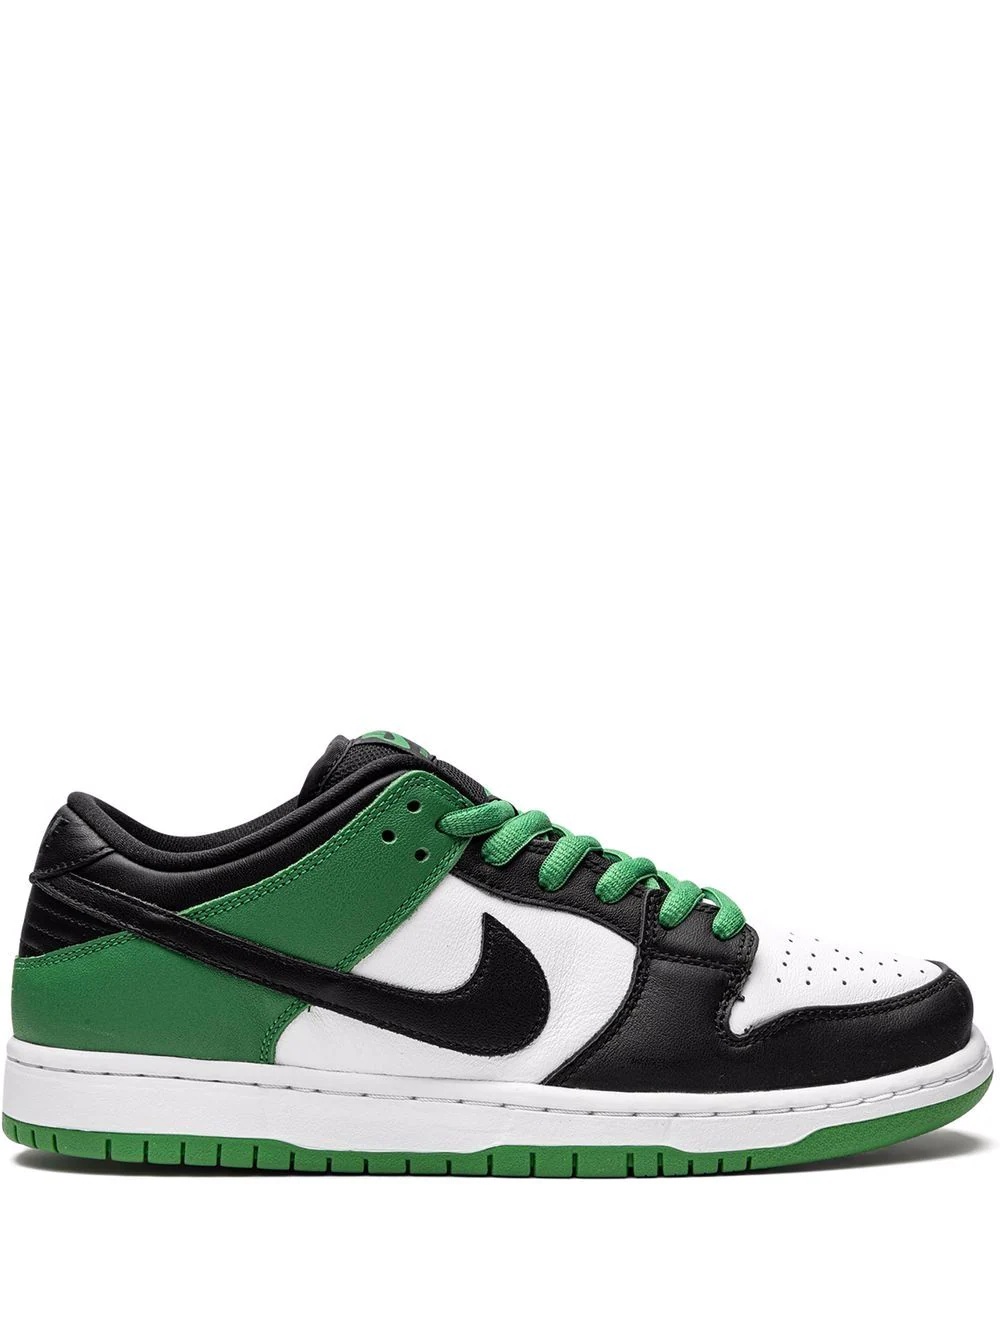 Dunk Low Pro SB "Classic Green" sneakers - 1